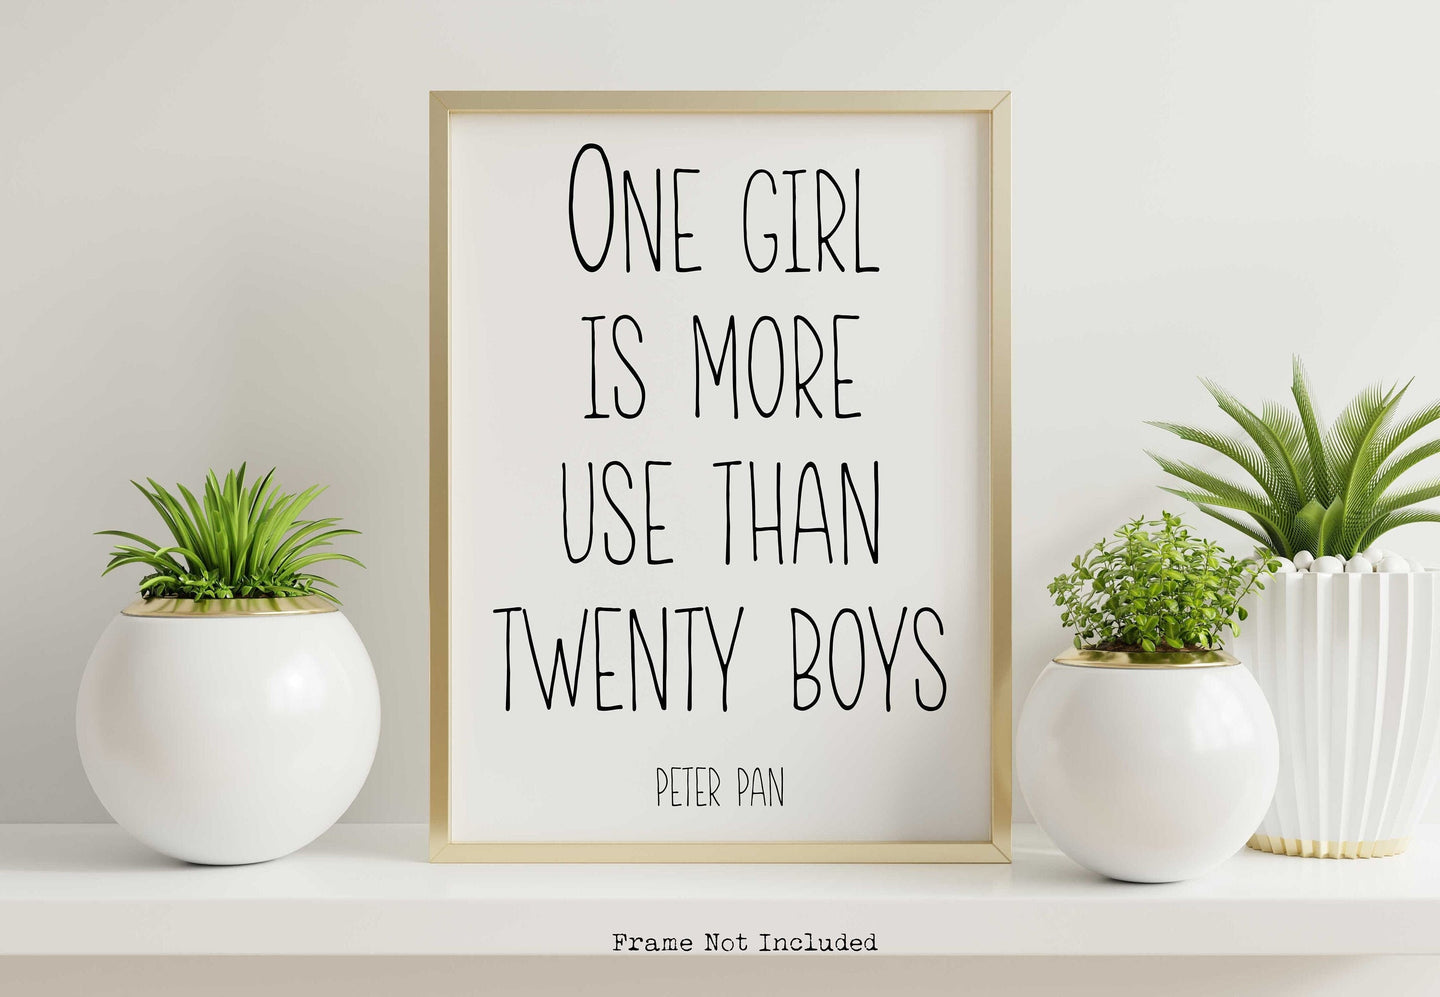 Peter Pan Quote - One girl is more use than twenty boys - Unframed book Print for baby girl nursery wall art